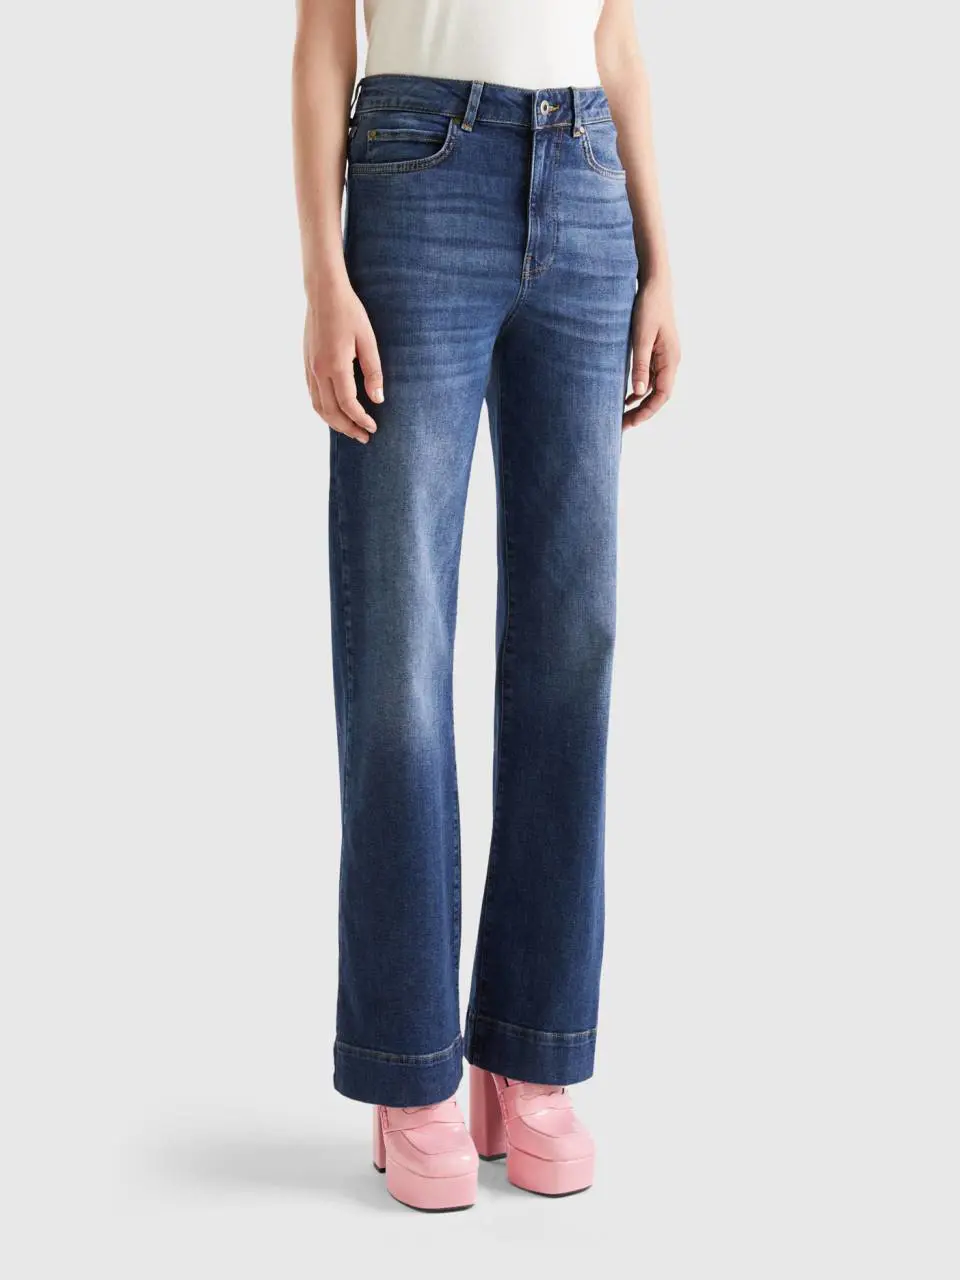 Benetton stretch flared jeans. 1